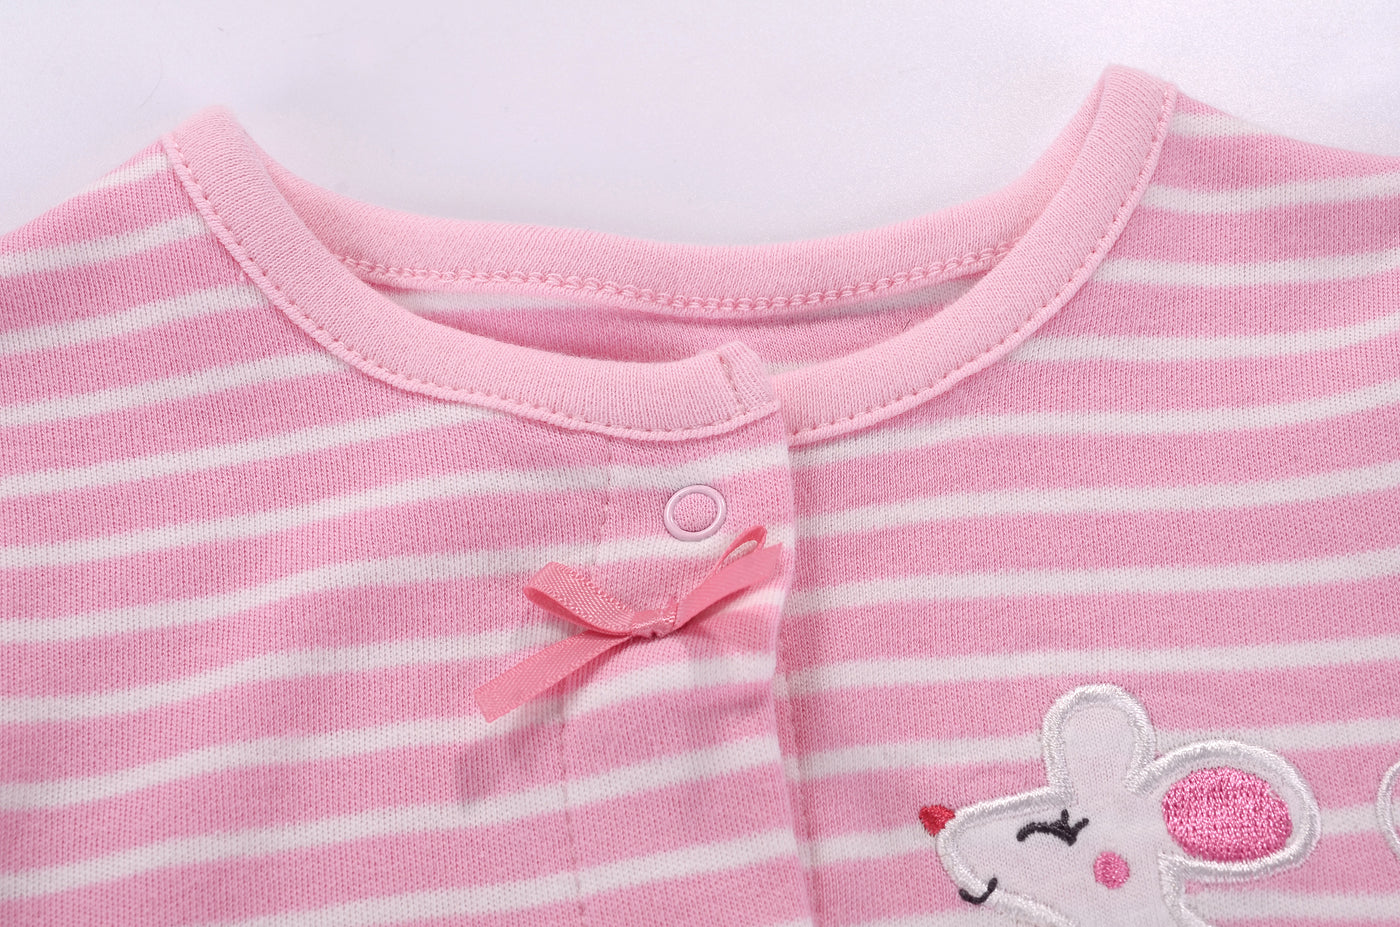 Baby Girl Romper Pink Stripes w Embroidered Little Mouse - Little Kooma